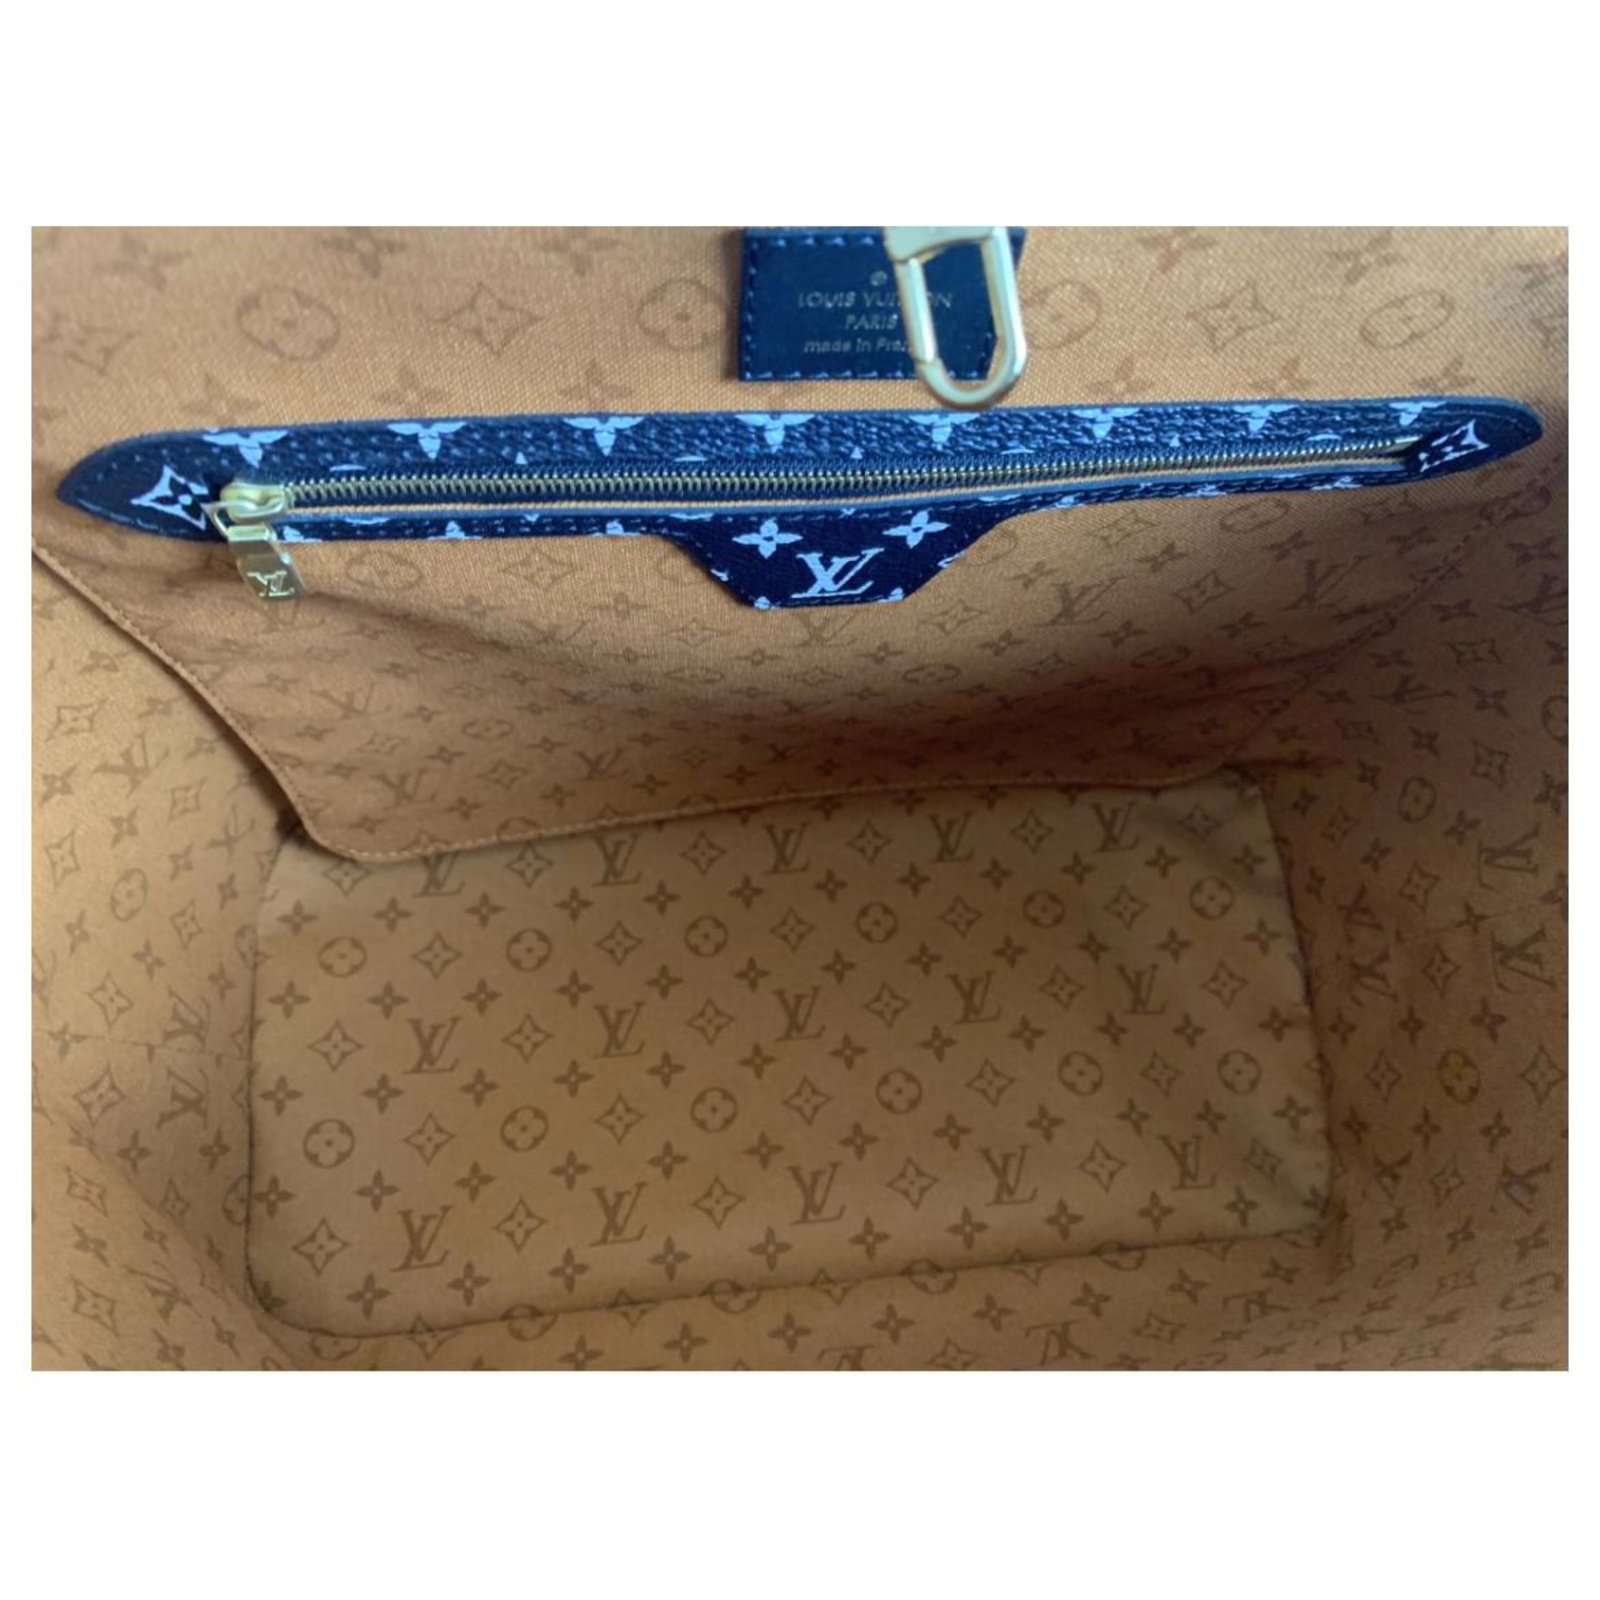 Louis Vuitton Limited Edition Monogram Crafty Neverfull MM Tote